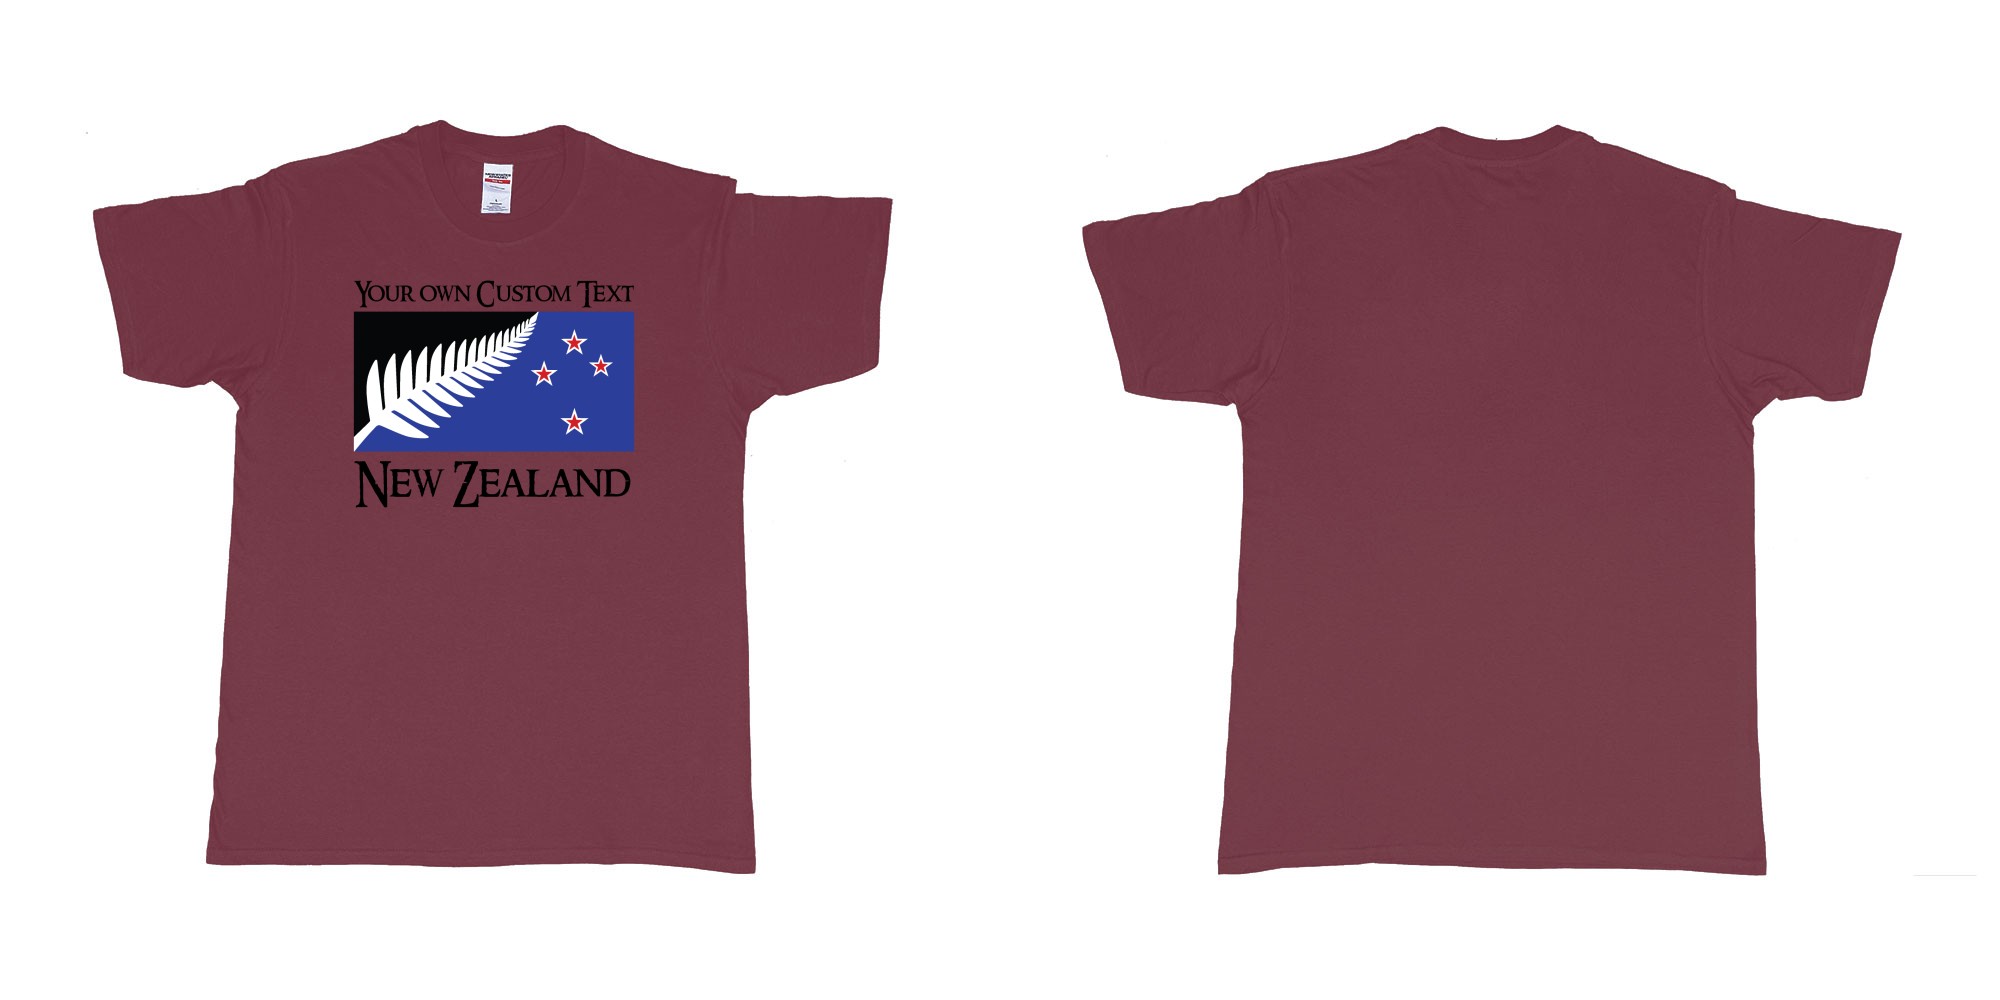 Custom tshirt design new zealand silver fern flag in fabric color marron choice your own text made in Bali by The Pirate Way